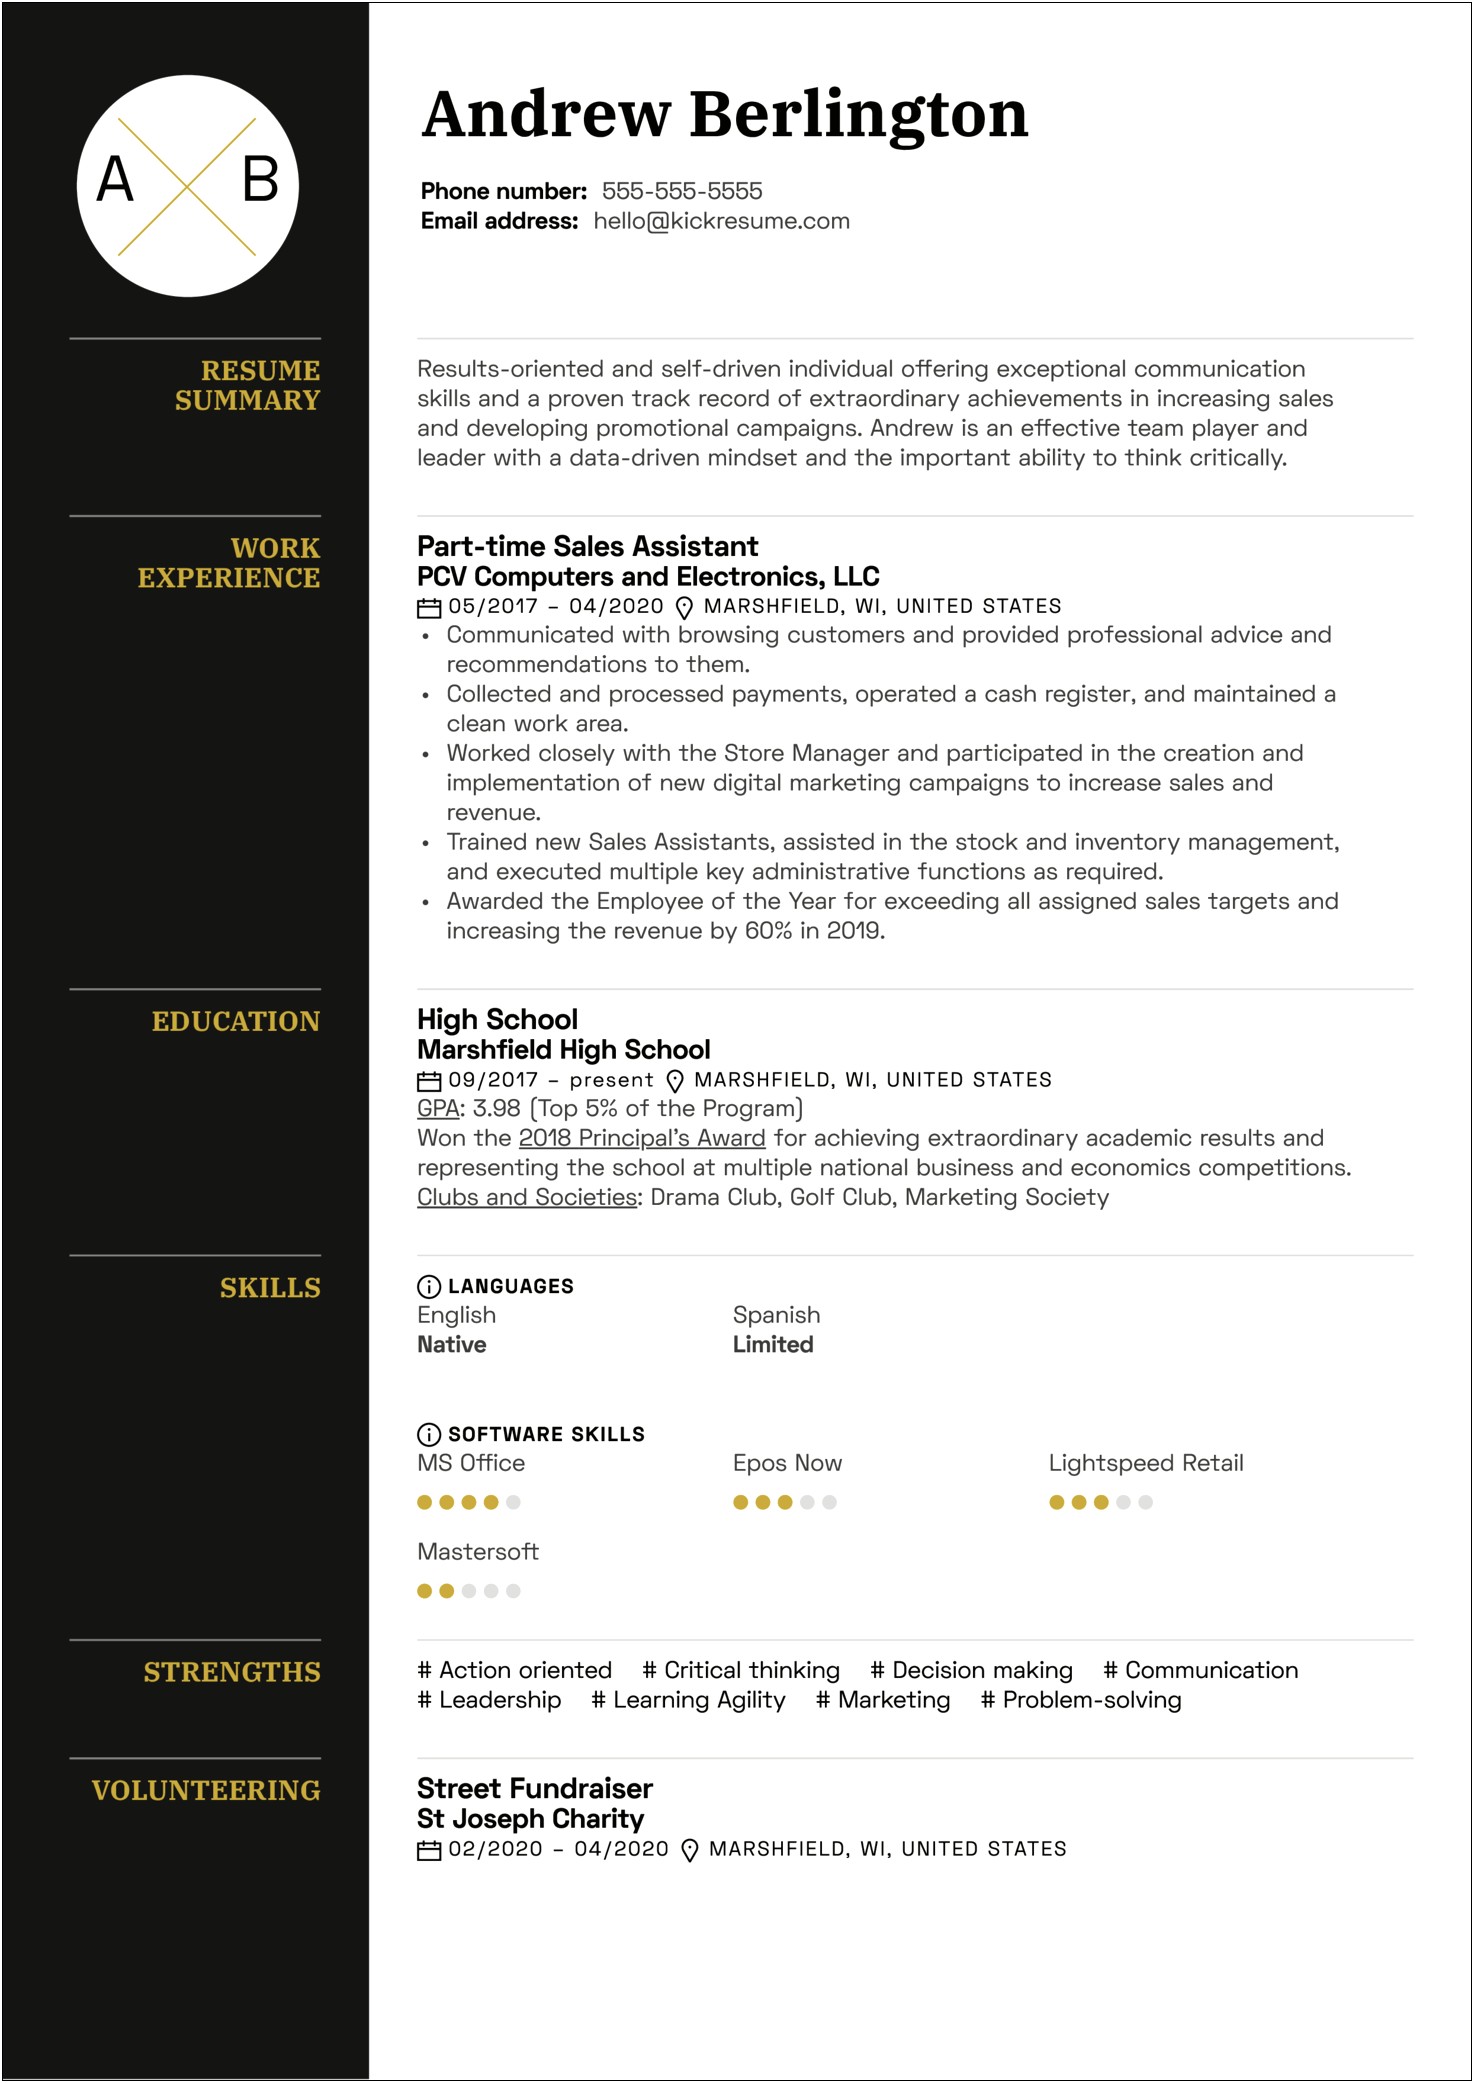 Free Resume Templates For Communications Professionals